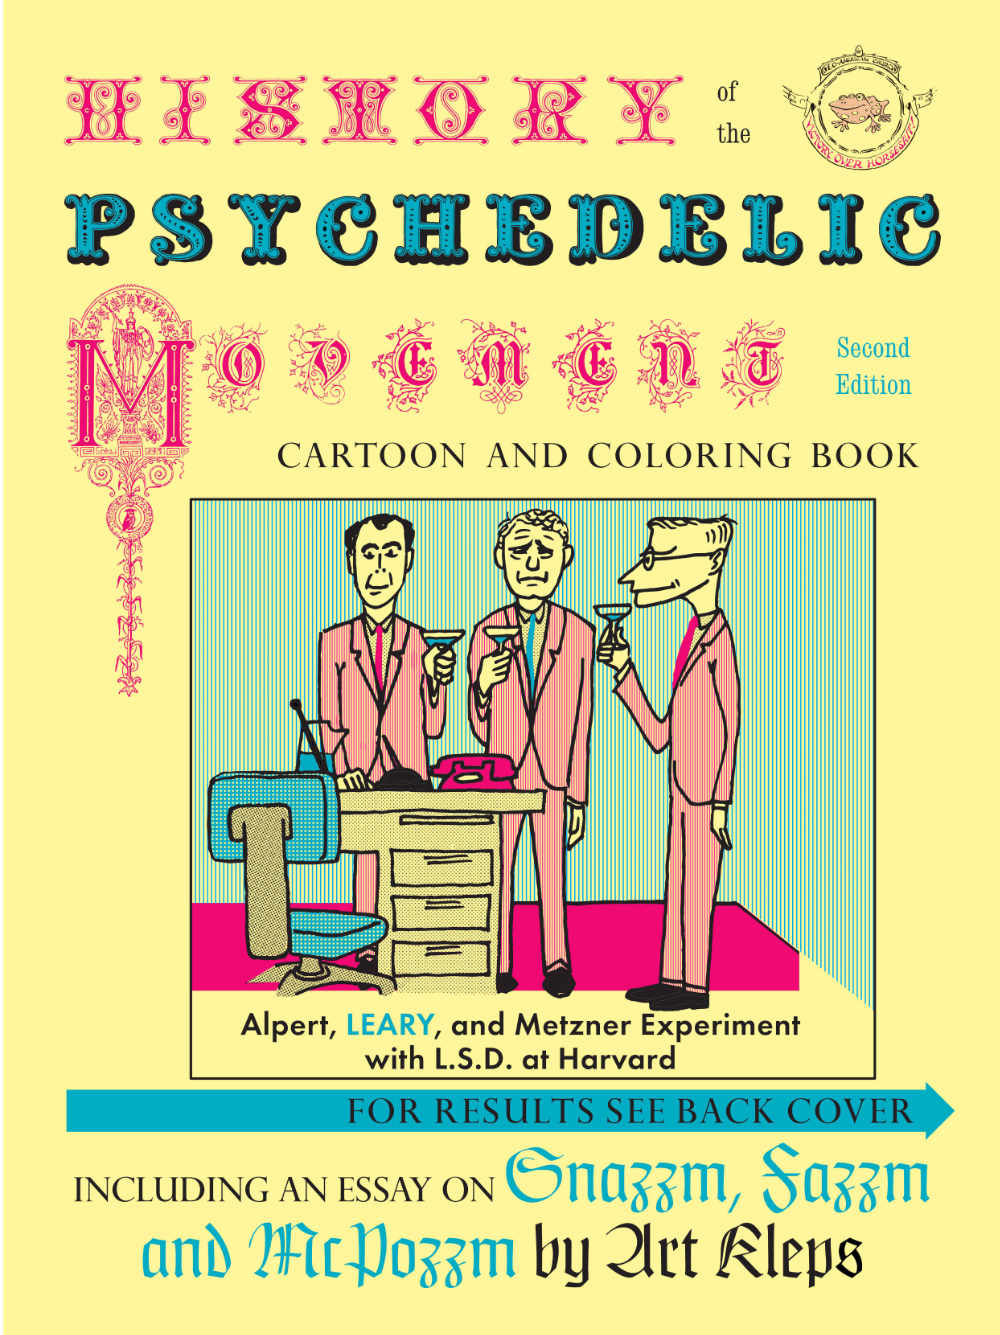 History of the Psychedelic Movement Cartoon and Coloring Book